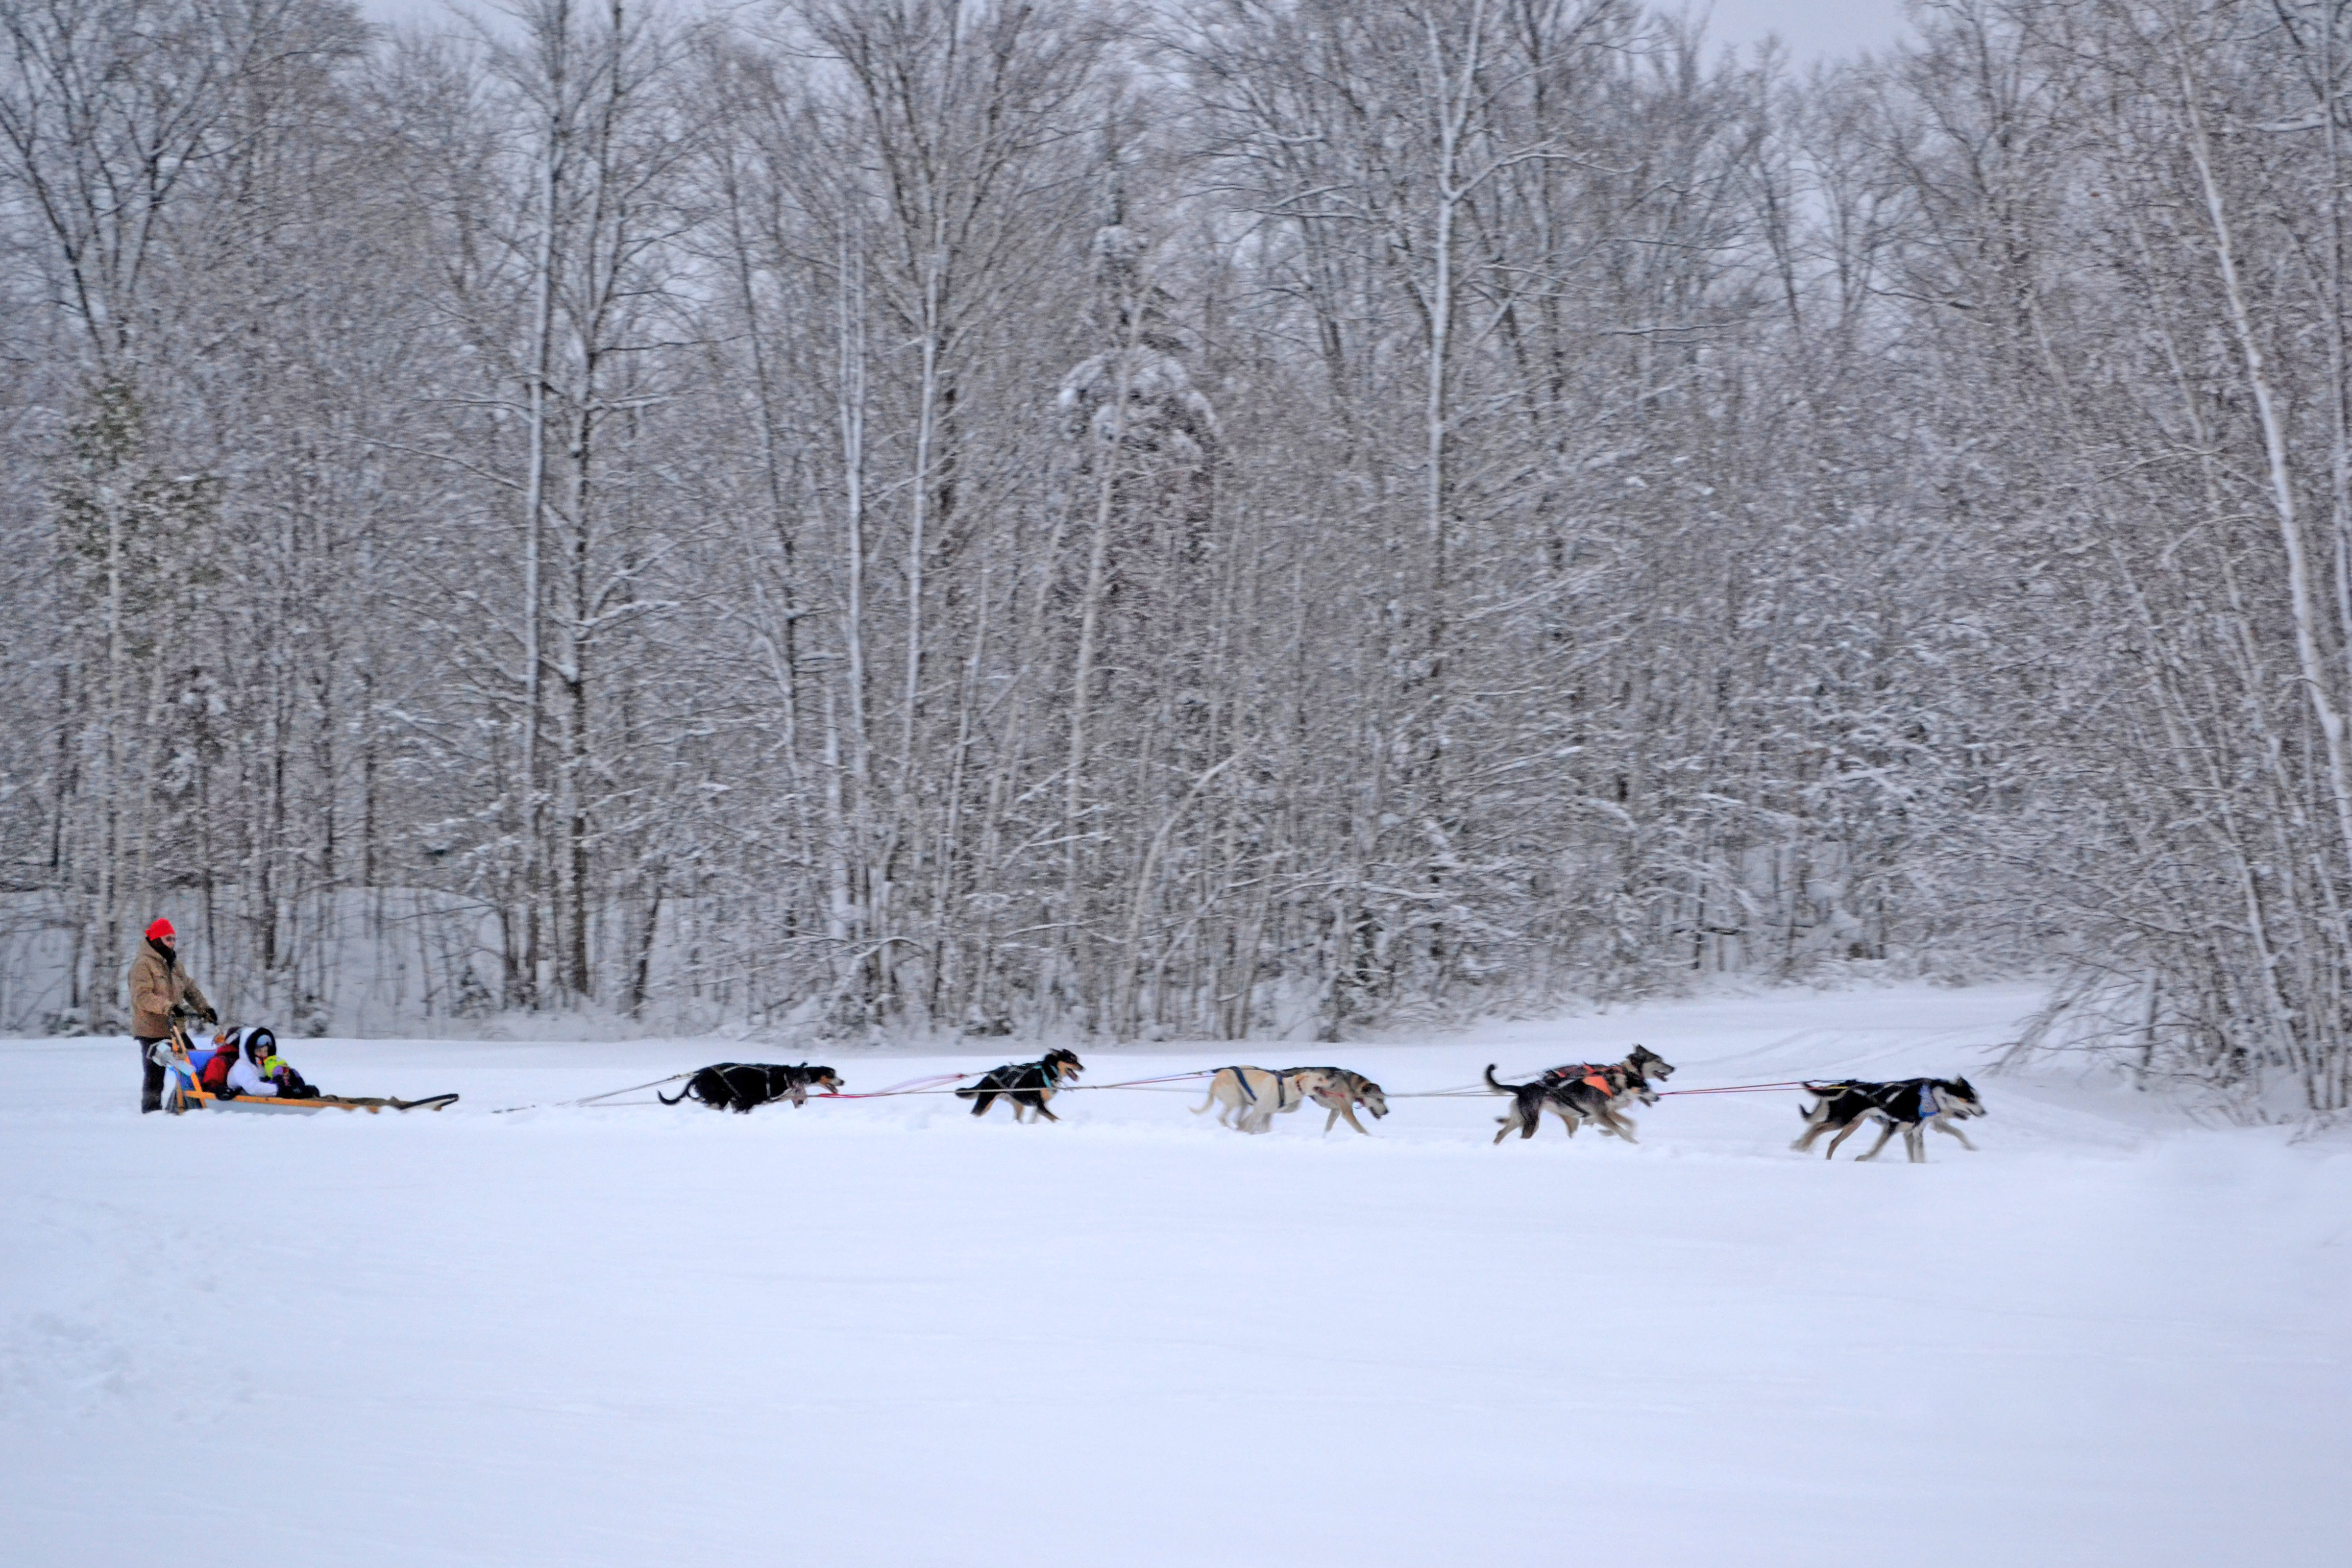 Dogsledding on a snowy field with trees in the background